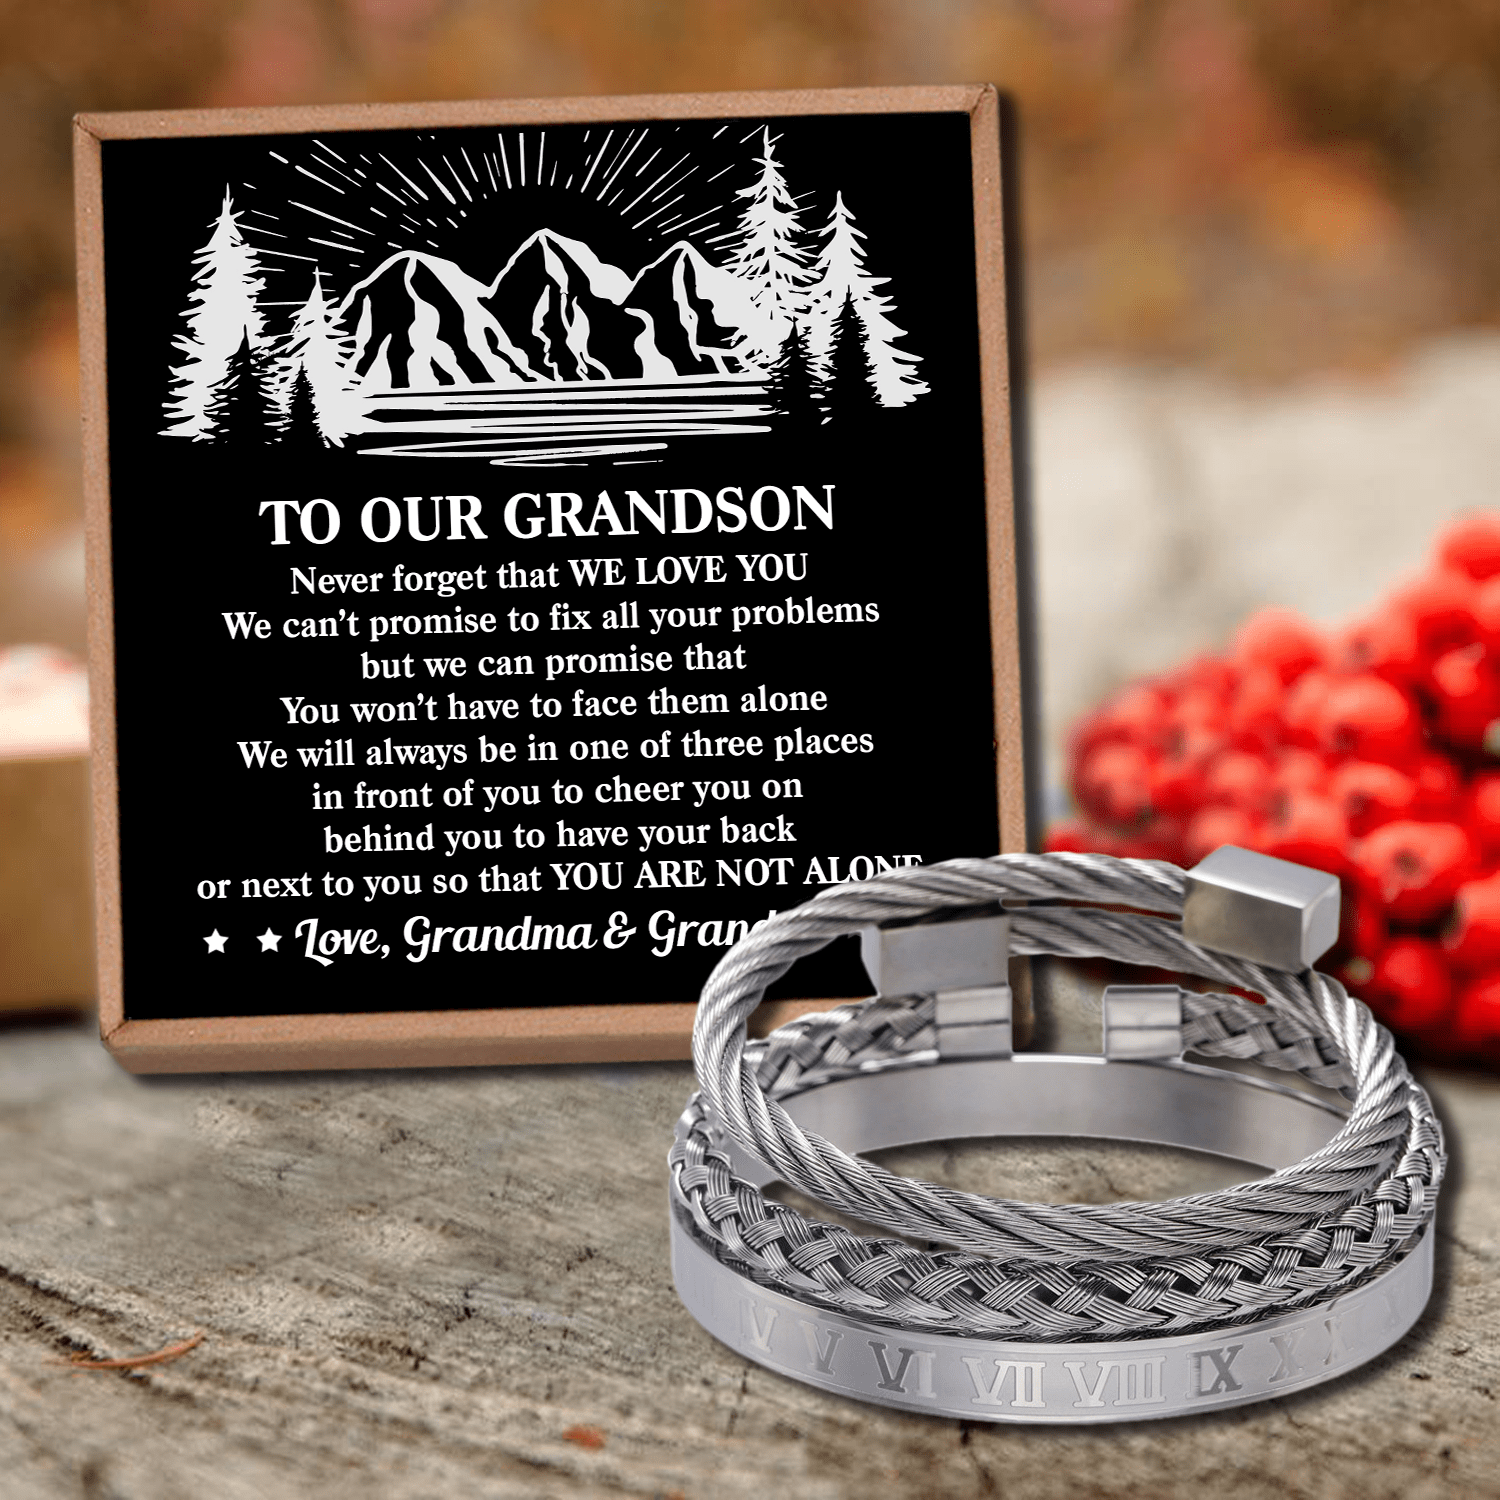 Bracelets To Our Grandson - You Are Not Alone Roman Numeral Bracelet Set Silver GiveMe-Gifts